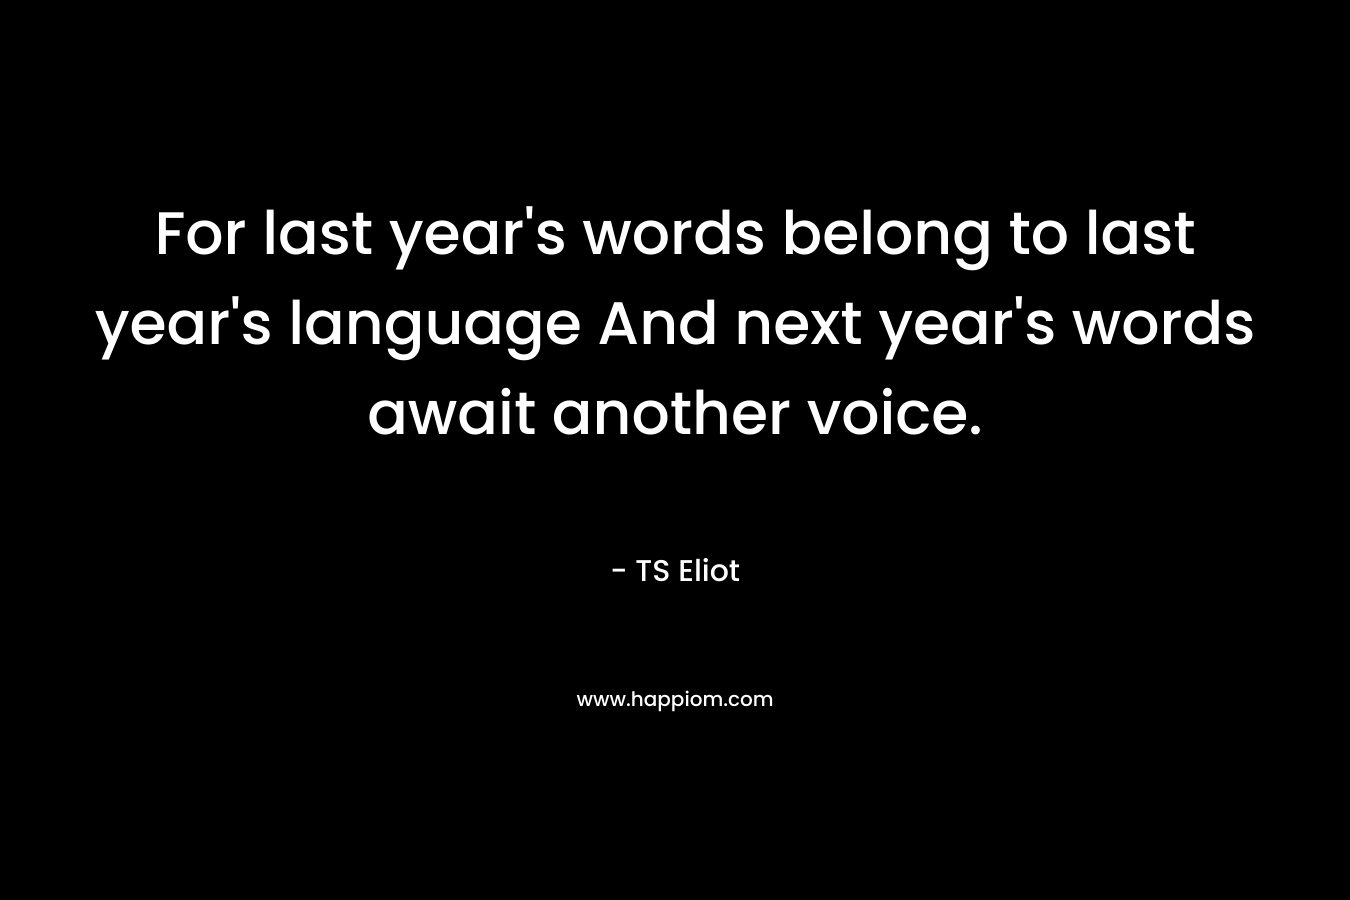 For last year's words belong to last year's language And next year's words await another voice.